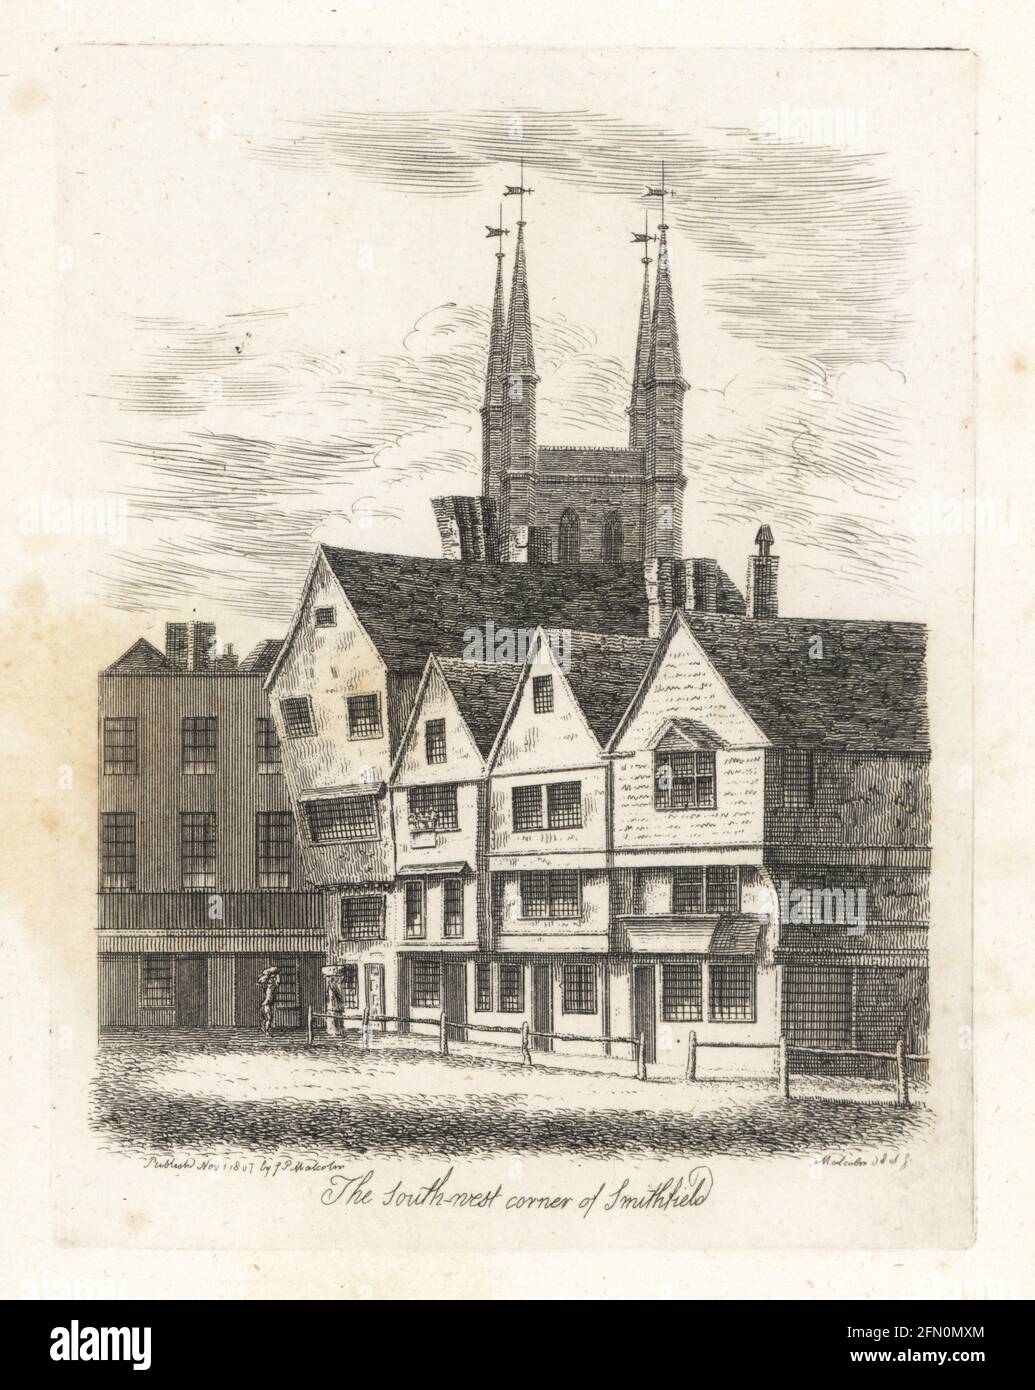 View of the south-west corner of Smithfield livestock market, London, 1807. 17th century gabled timber framed buildings and the tower of St Sepulchre-without-Newgate church. Copperplate drawn and engraved by James Peller Malcolm from his Anecdotes of the Manners and Customs of London during the 18th Century, Longman, Hurst, London, 1808. Malcolm (1767-1815) was an American-English topographer and engraver, Fellow of the Society of Antiquaries. Stock Photo